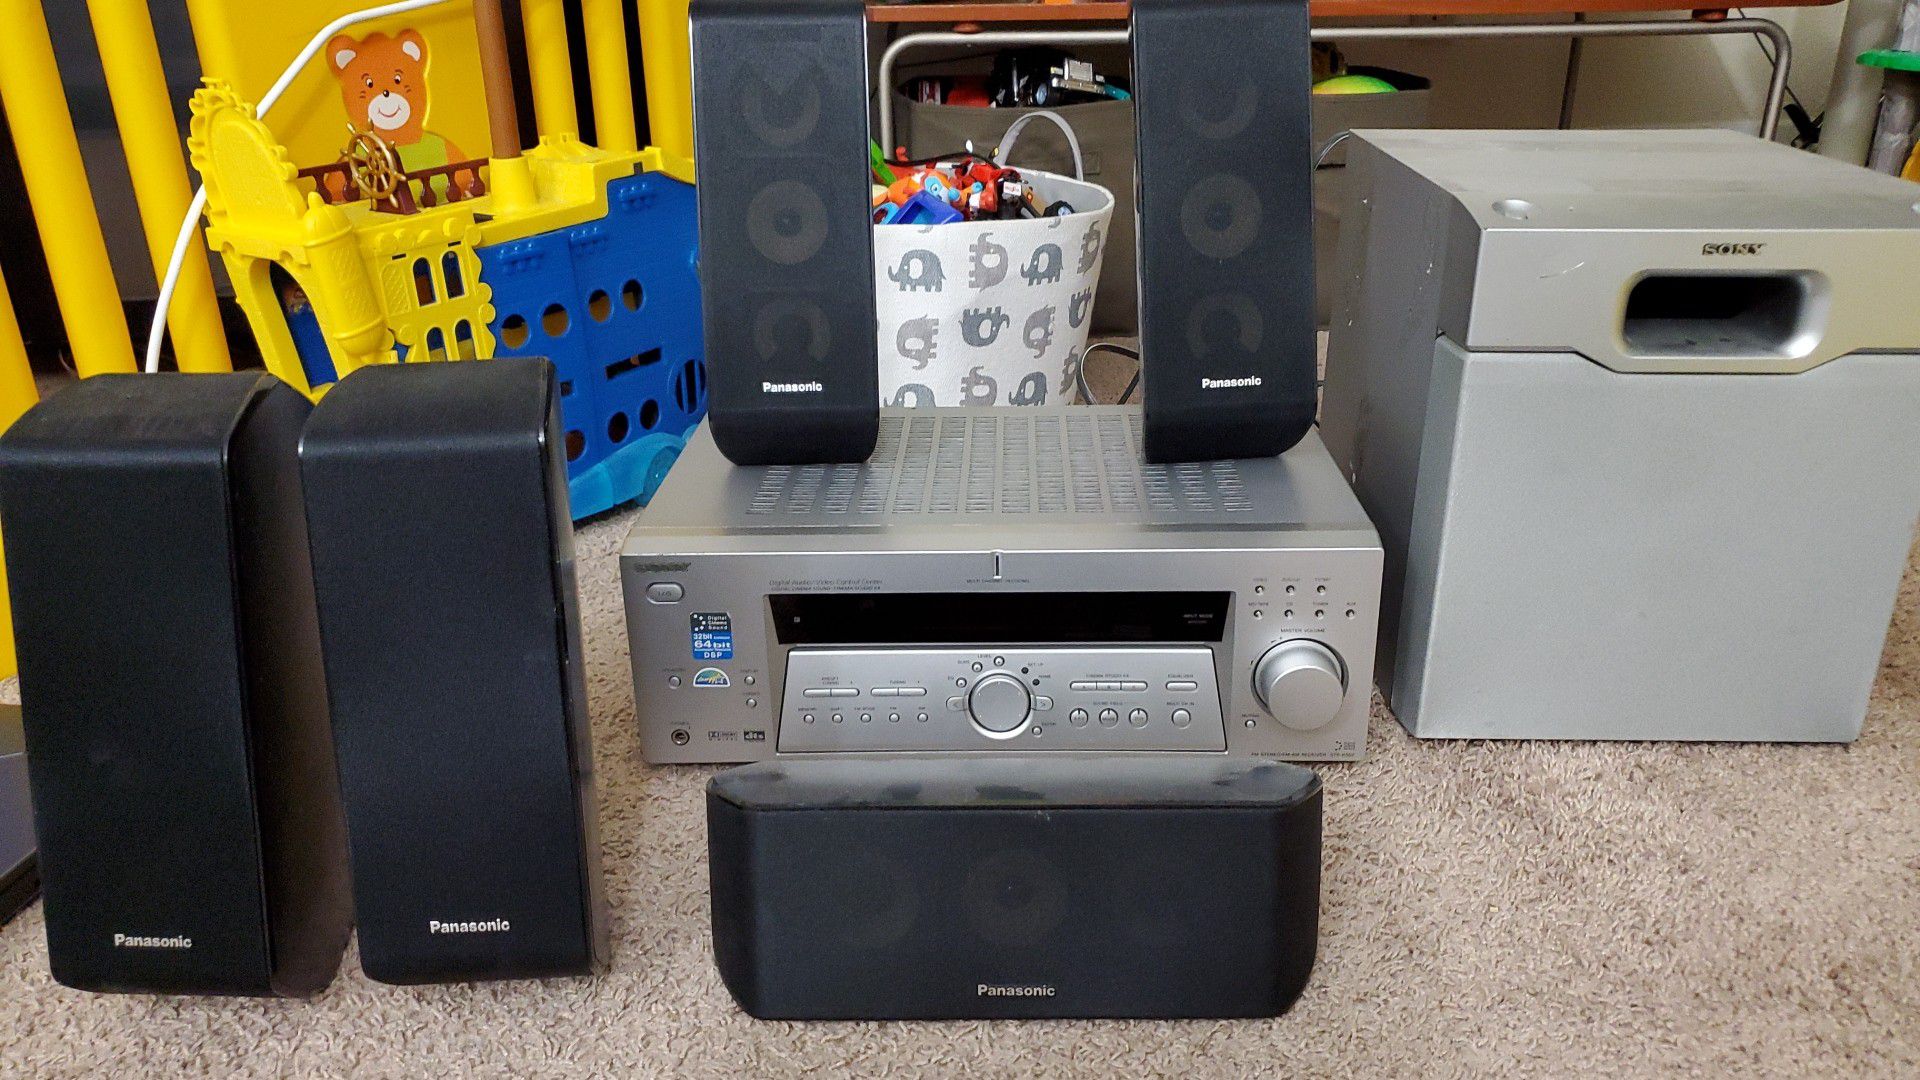 Sony Digital Audio / Video Home Theater 5.1 Stereo Receiver and speakers